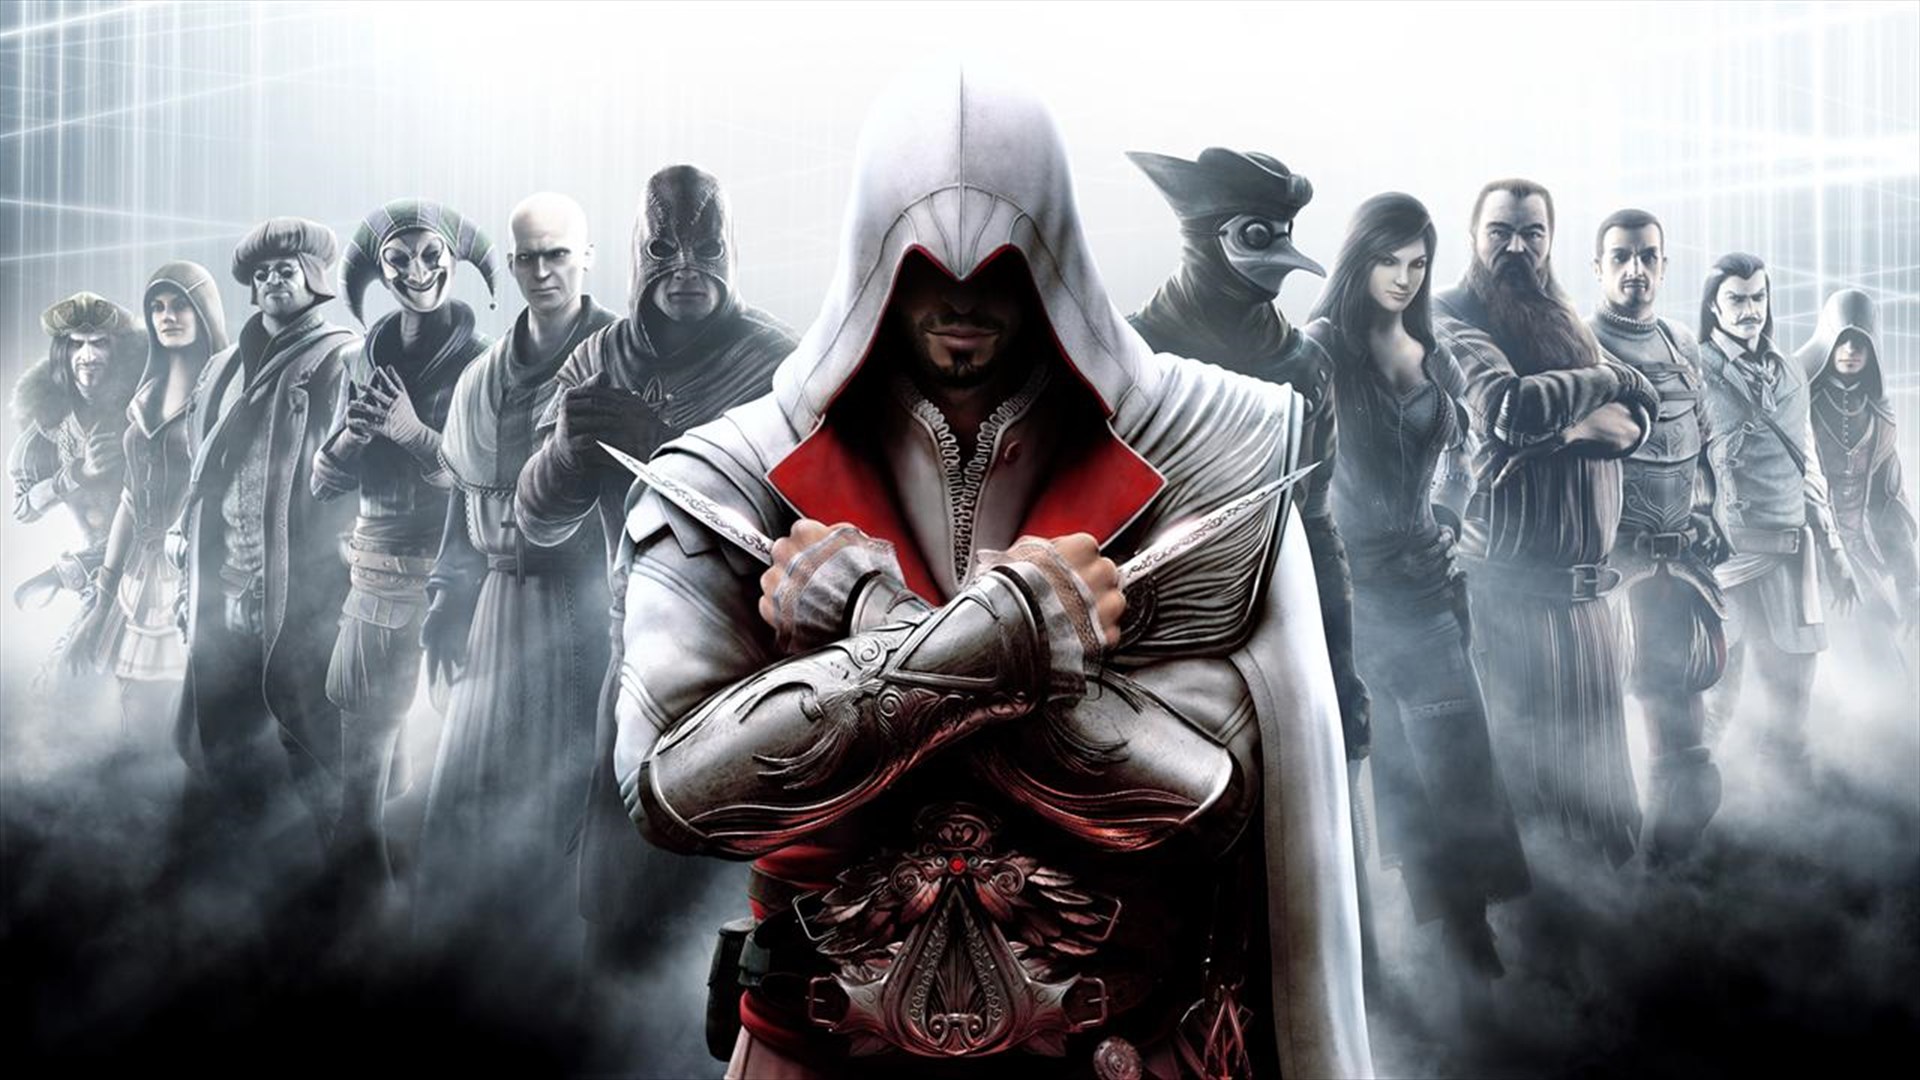 Next Assassin's Creed Game Rumored to Have an Unexpected Setting